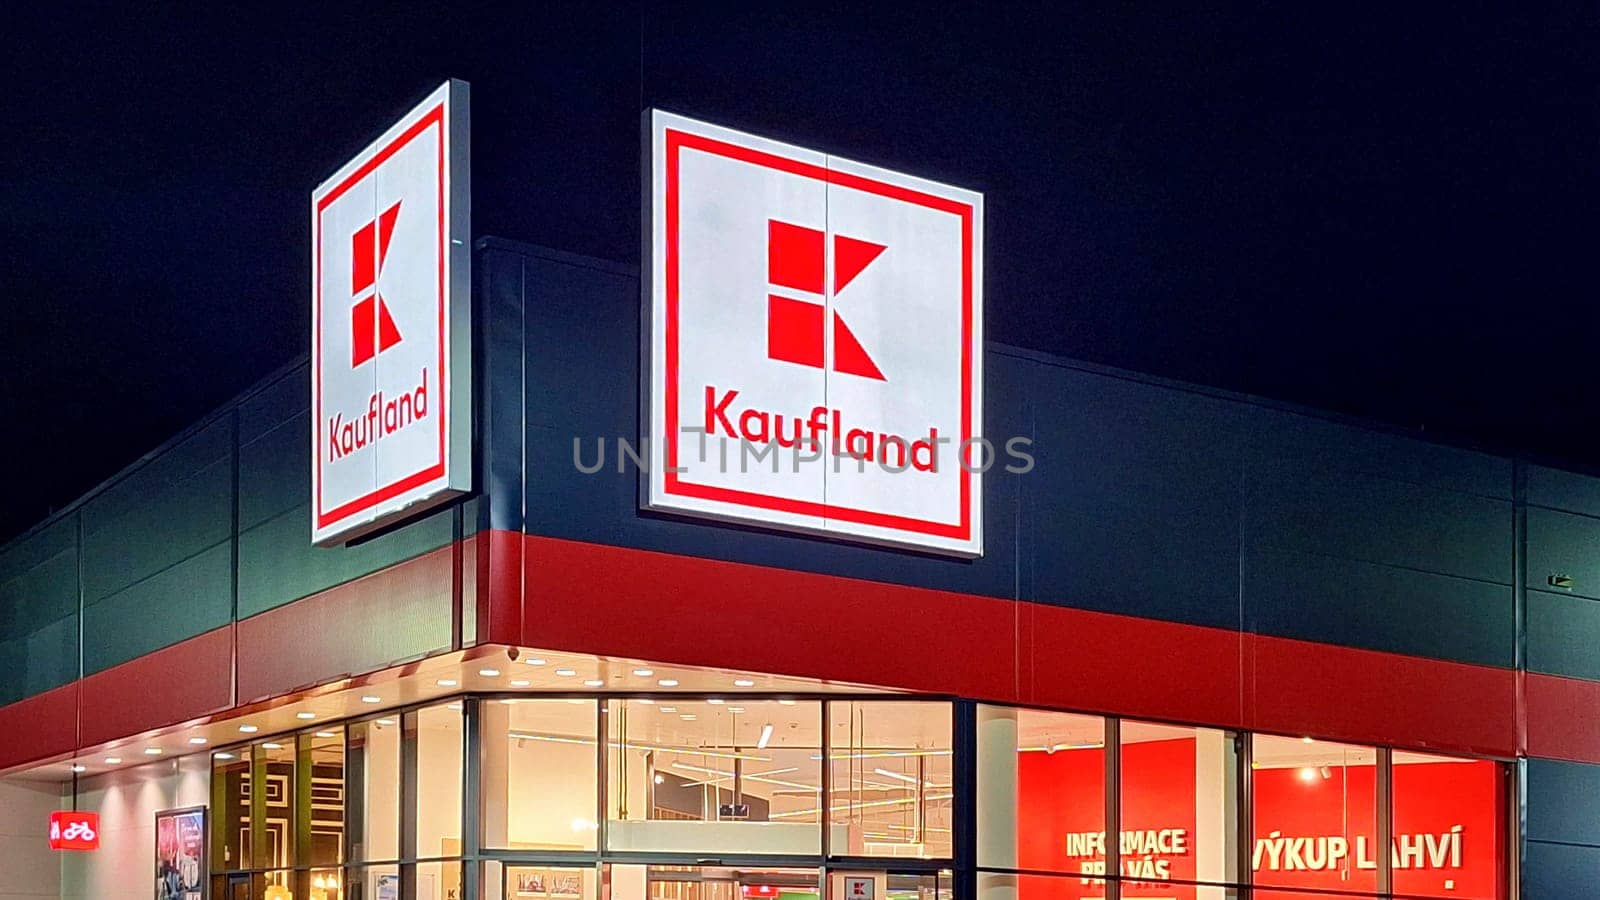 HUSTOPECE, CZECH REPUBLIC - DECEMBER 14, 2023: Kaufland logo on hypermarket from German chain, part of Schwartz Gruppe which also owns Lidl. It operates over 1,500 stores in Germany, Croatia, the Czech Republic, Slovakia, Poland, Romania, Bulgaria and Moldova.